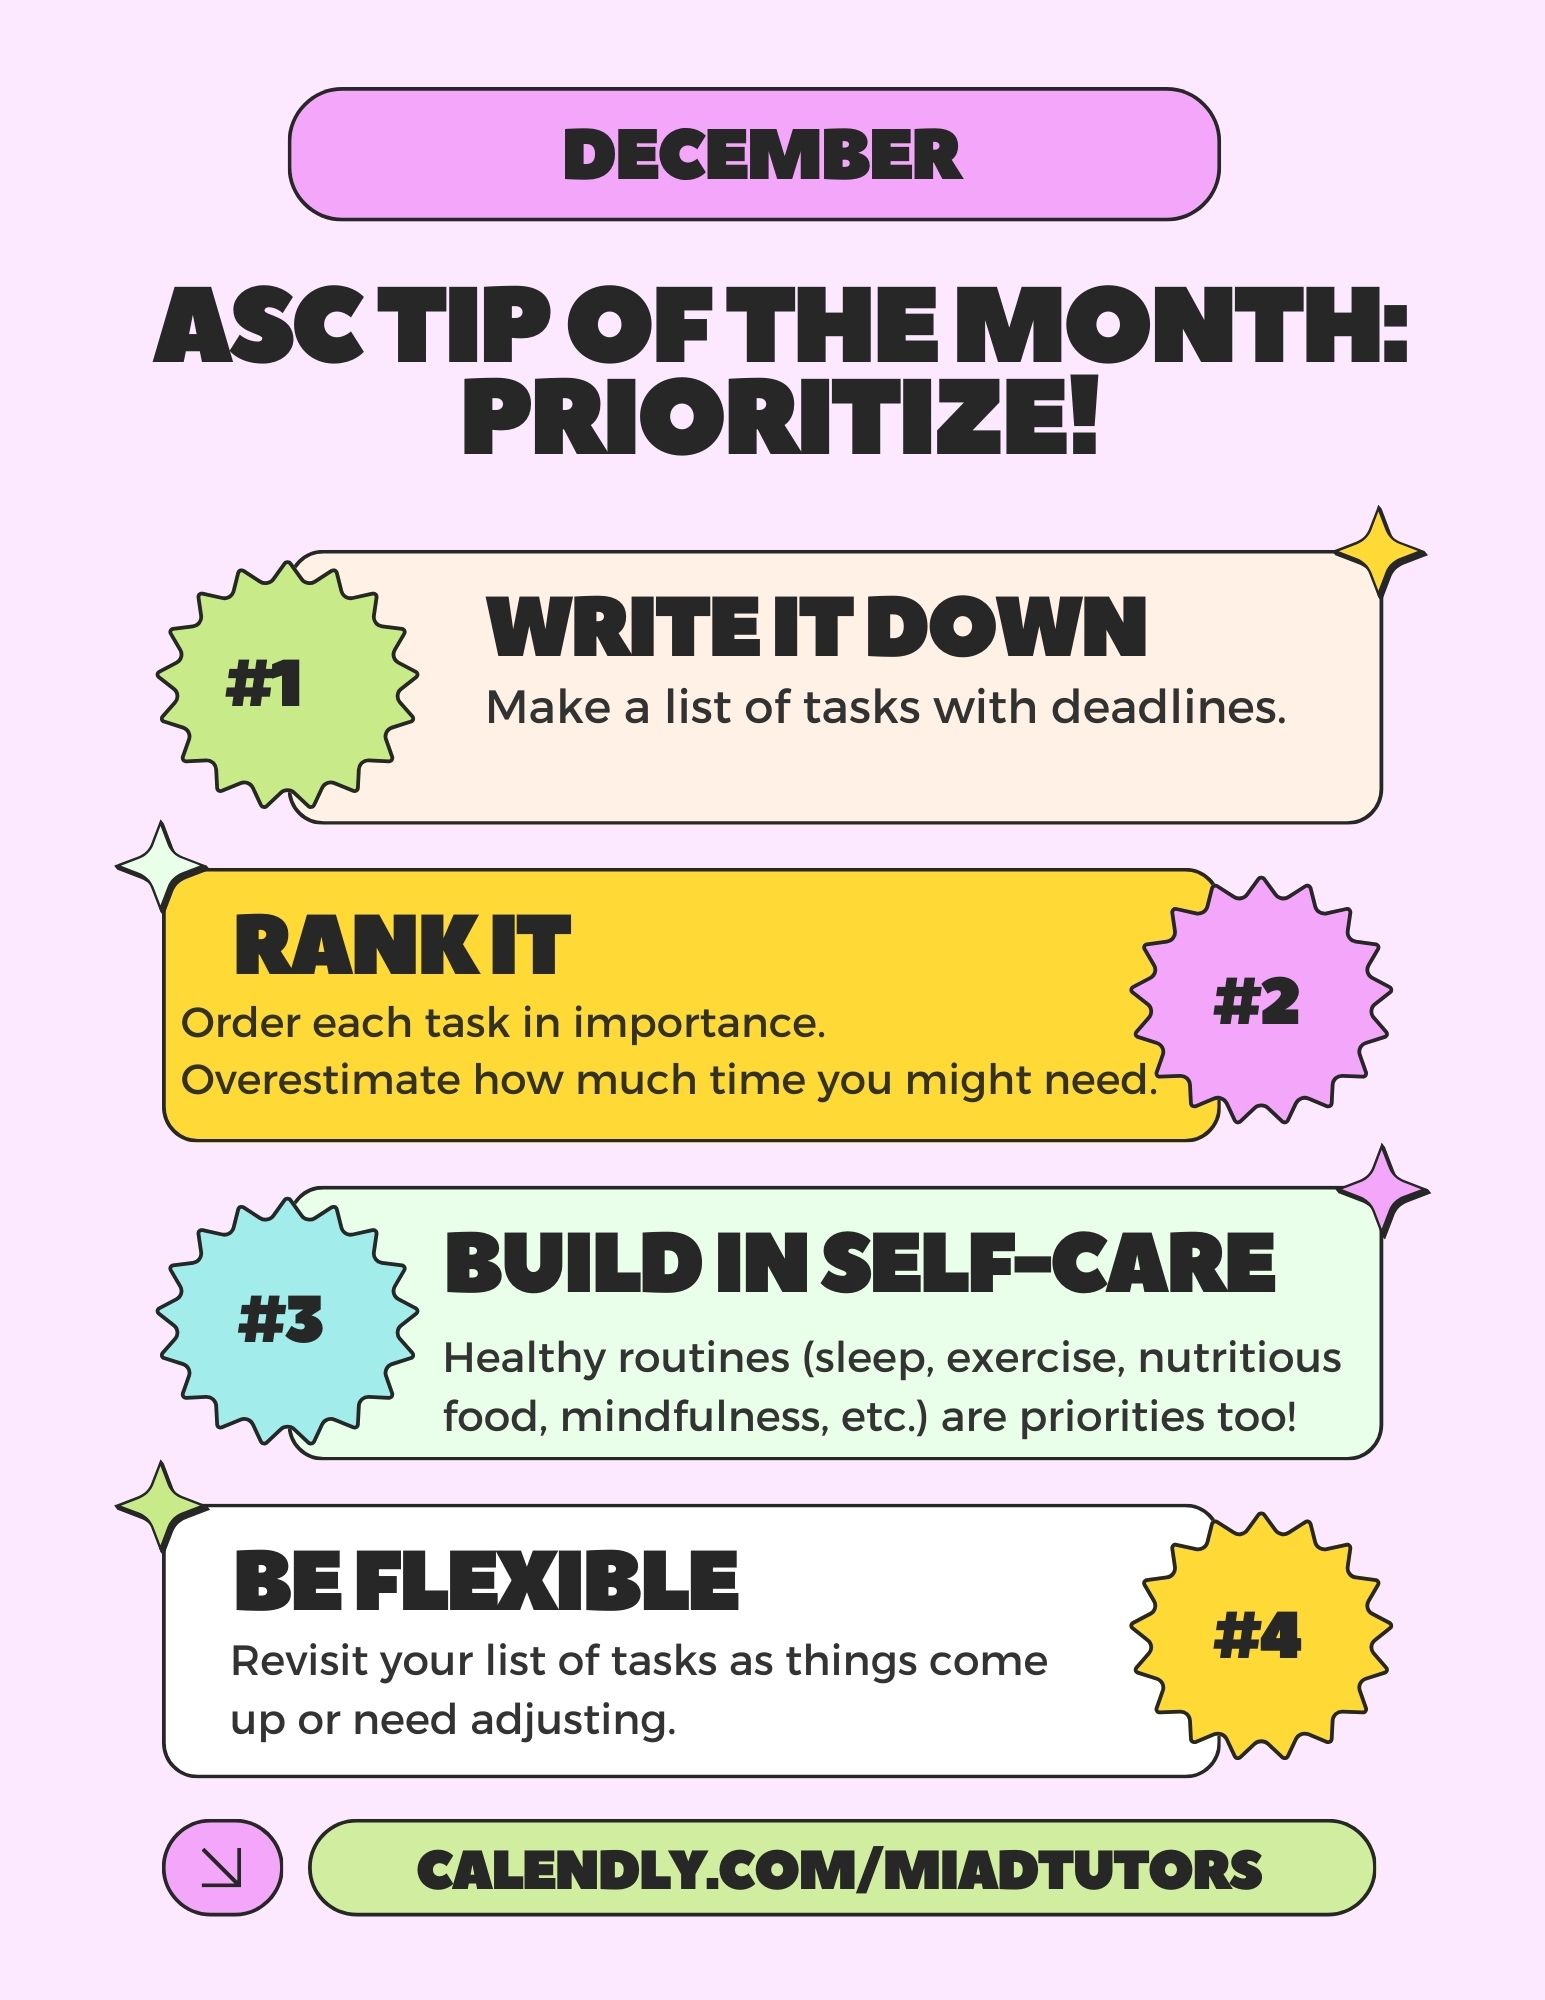 Academic Success Center (ASC) Tip of the Month